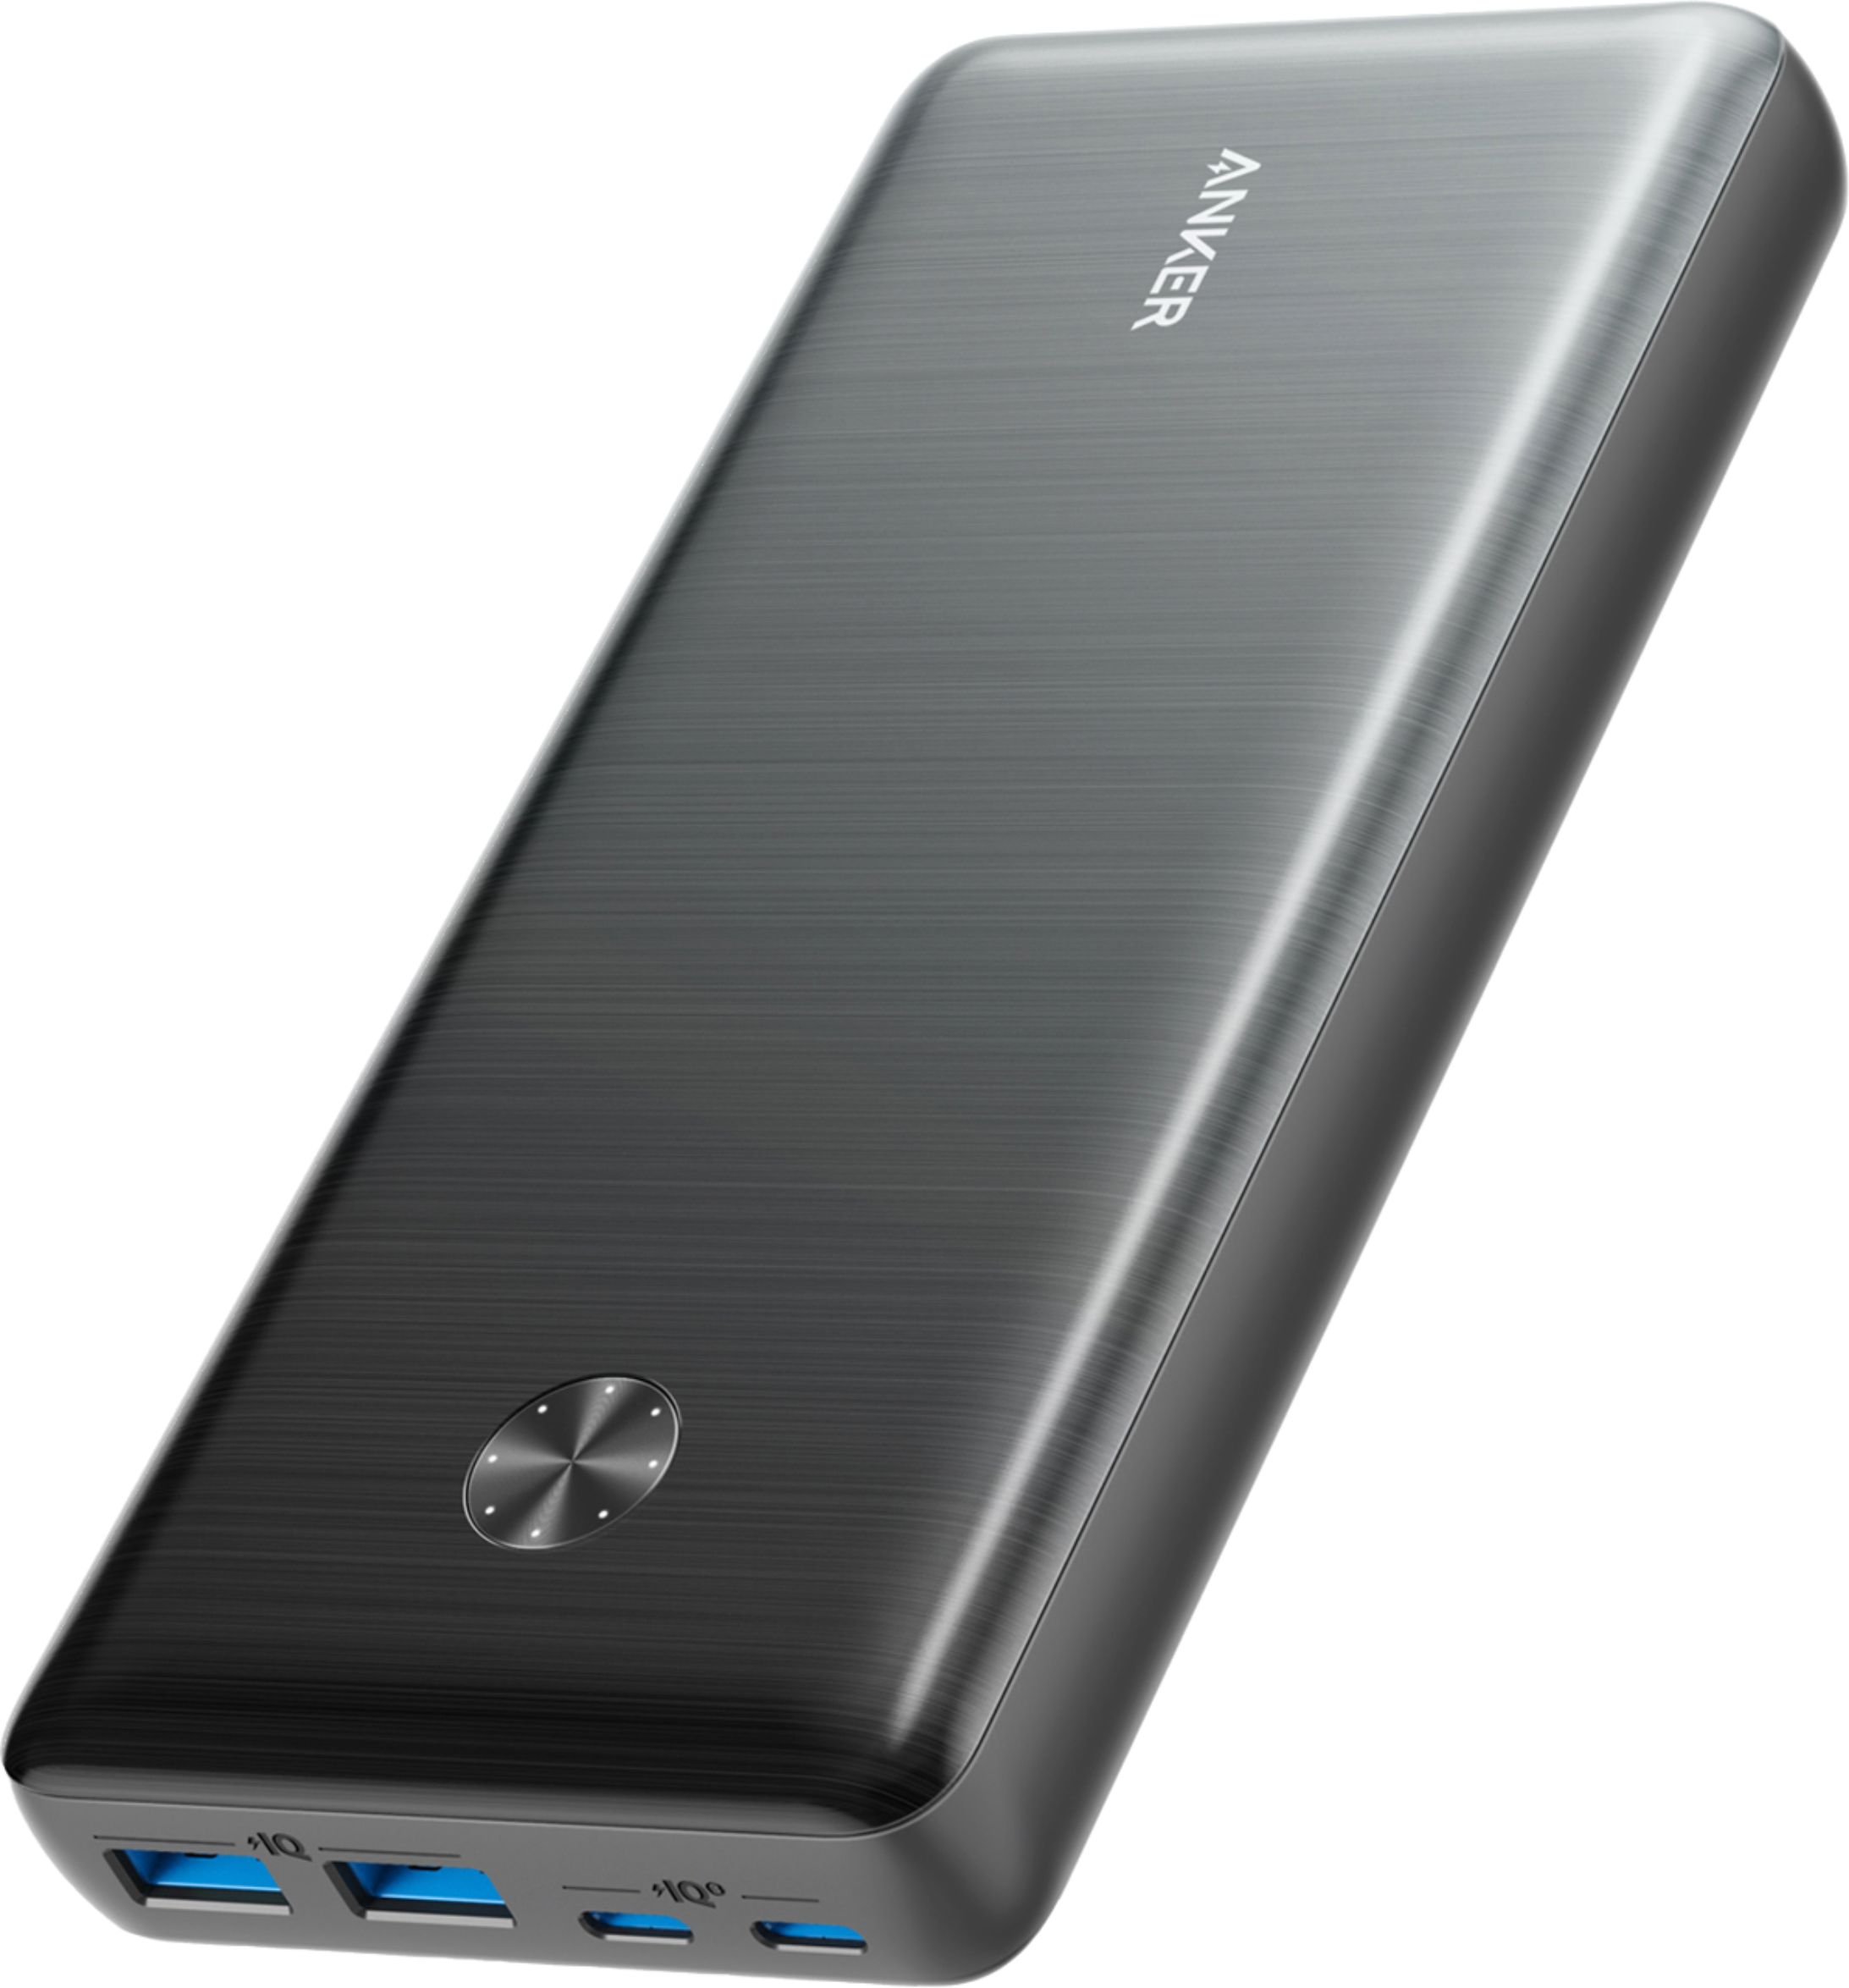 Anker 25600 mah 87W USB-C PD Portable Charger Black A1291H11-1 - Best Buy